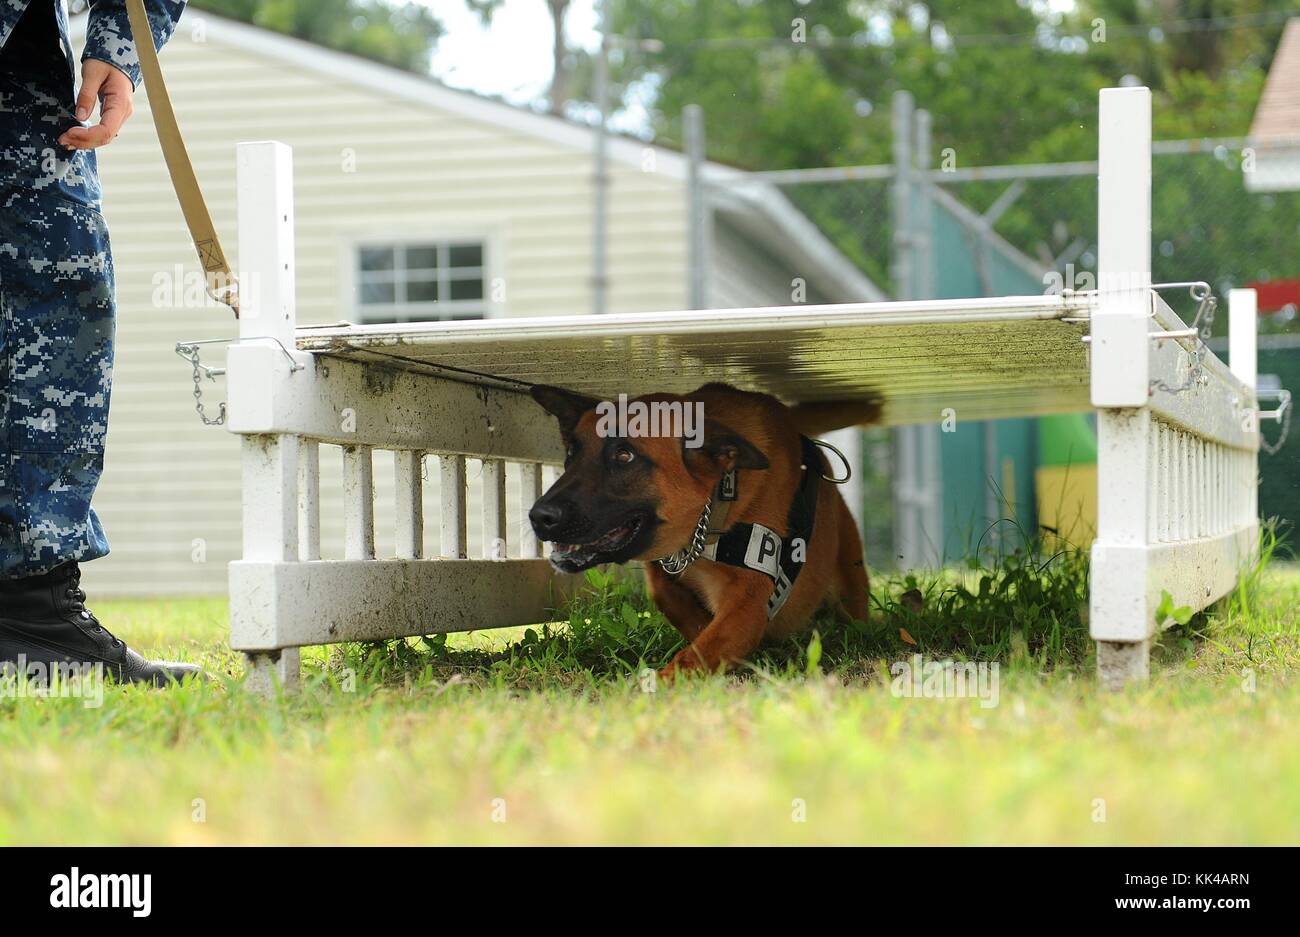 KKowalski, a military working dog assigned to Naval Station Mayport, runs through an obstacle course as part of endurance and obedience training, Mayport, Florida, 2012. Image courtesy Mass Communication Specialist Seaman Damian Berg/US Navy. Stock Photo